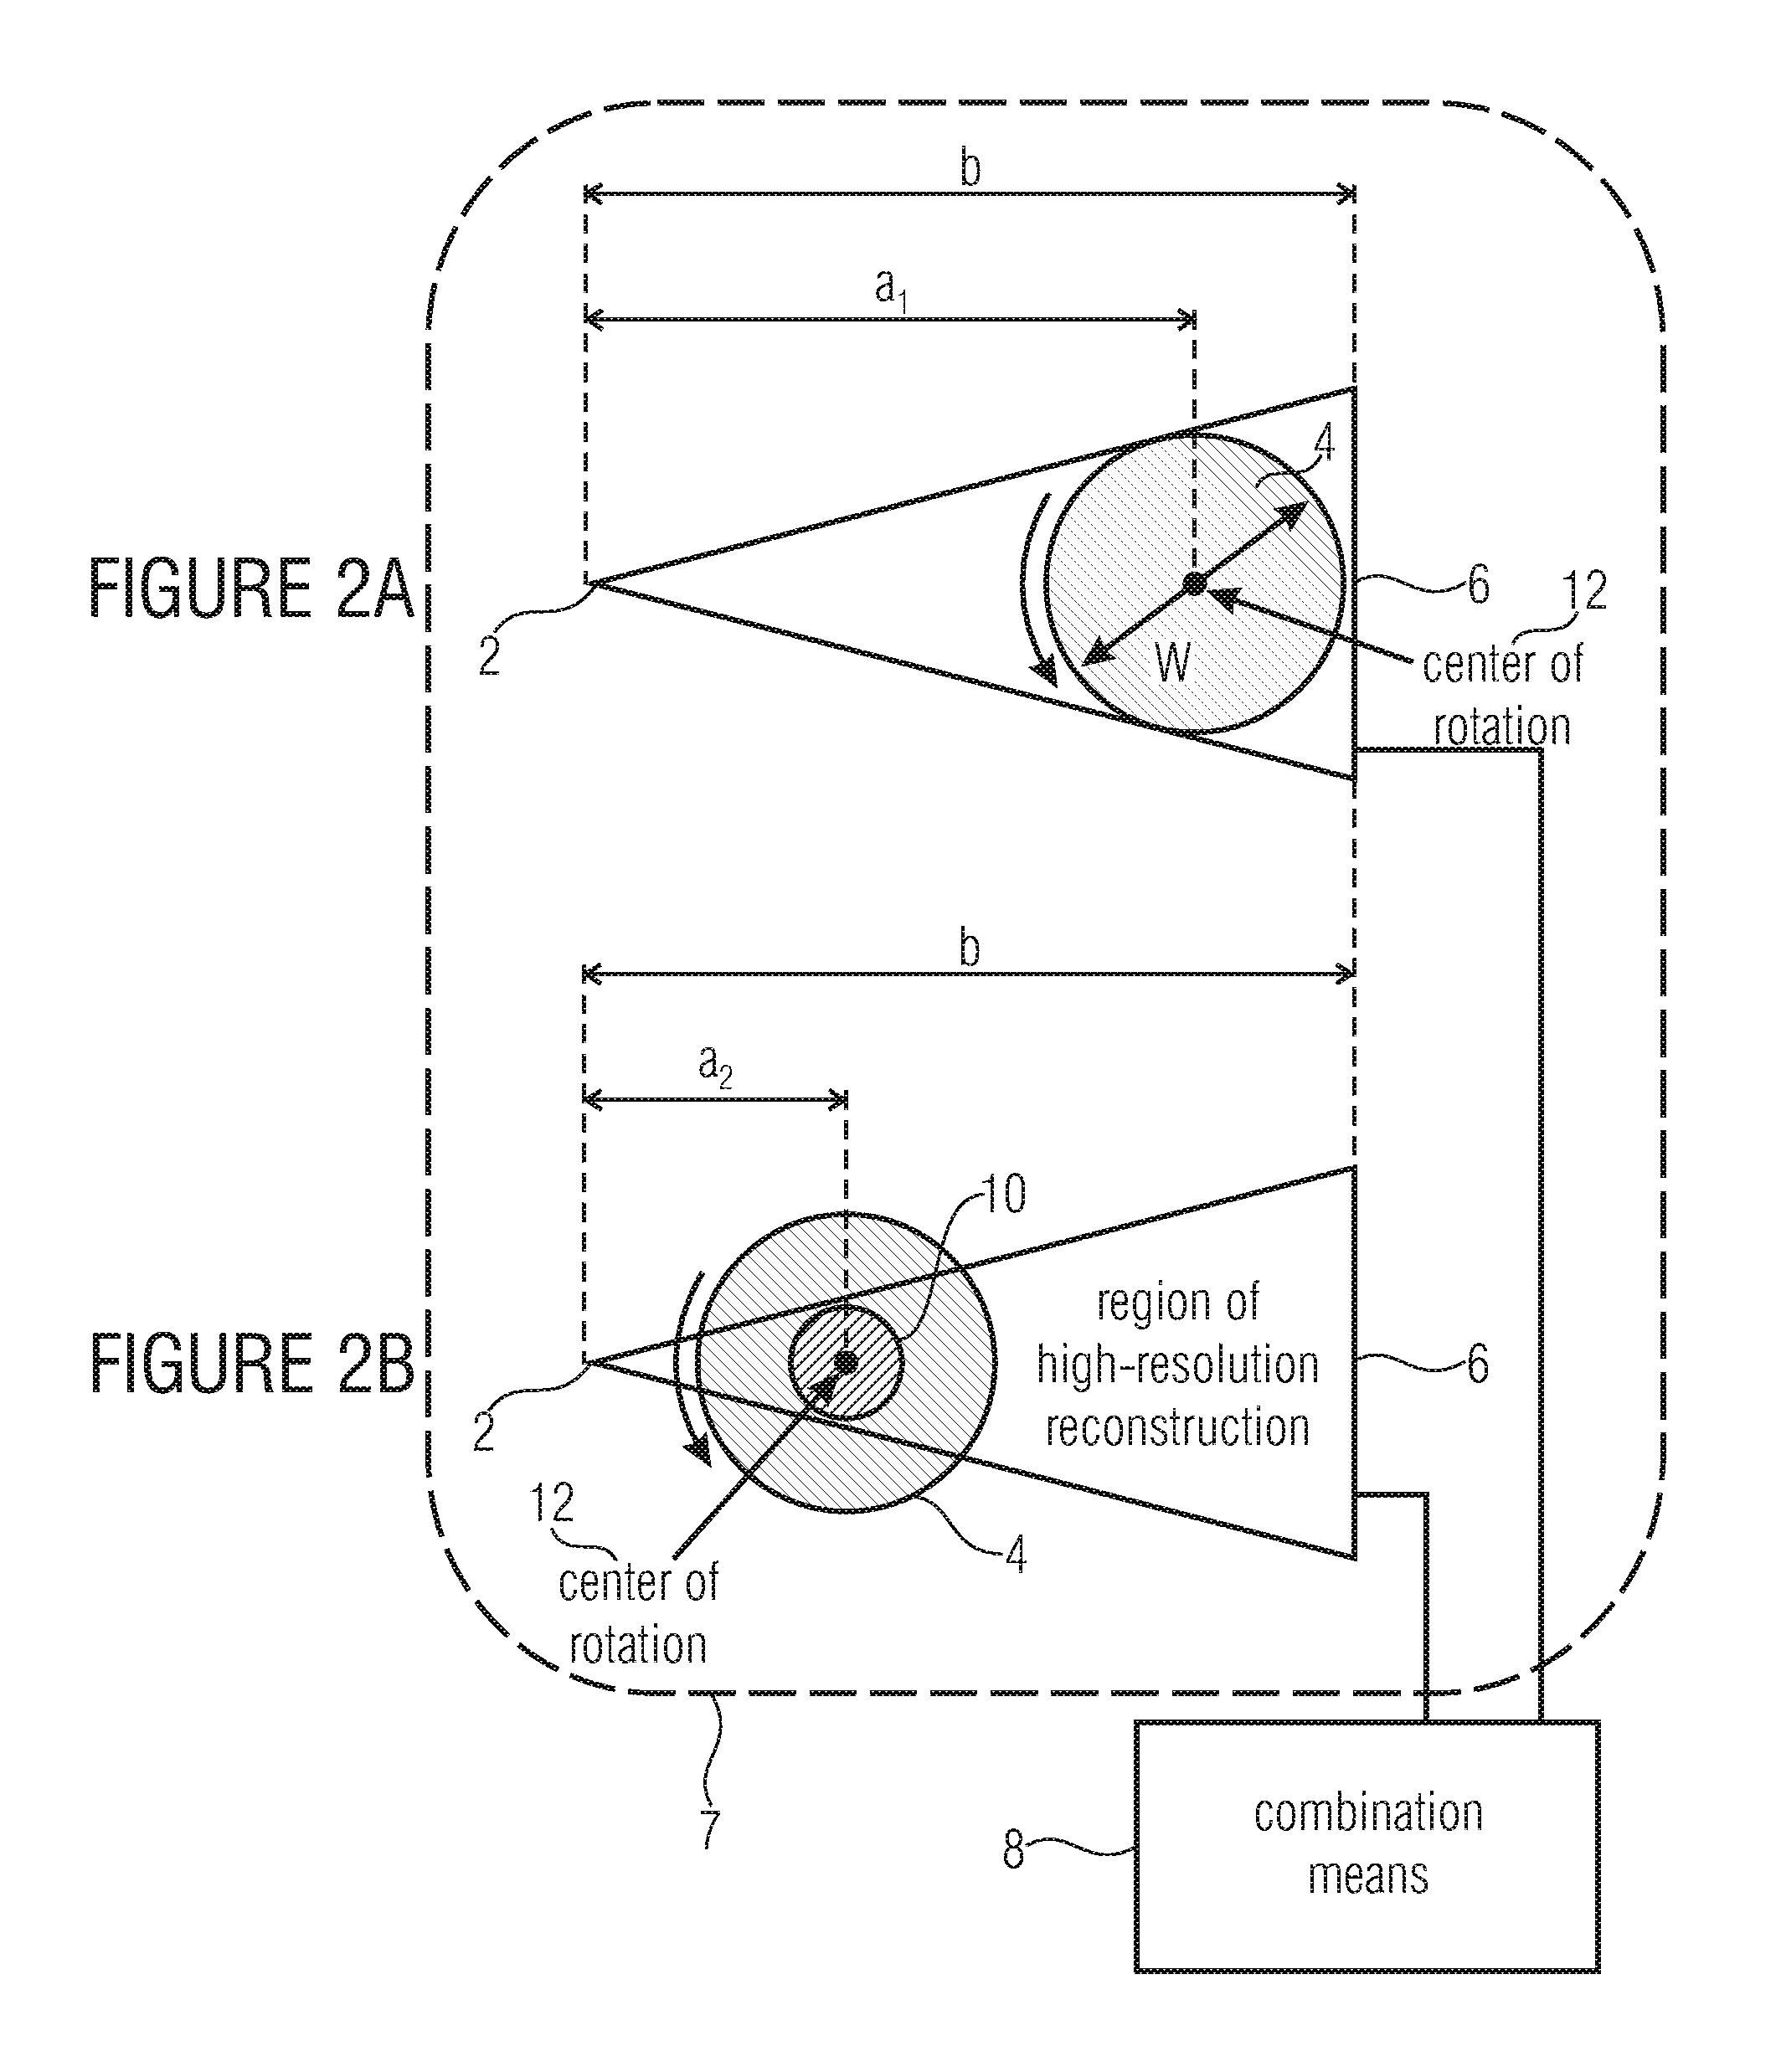 Device and method for producing a ct reconstruction of an object comprising a high-resolution object region of interest